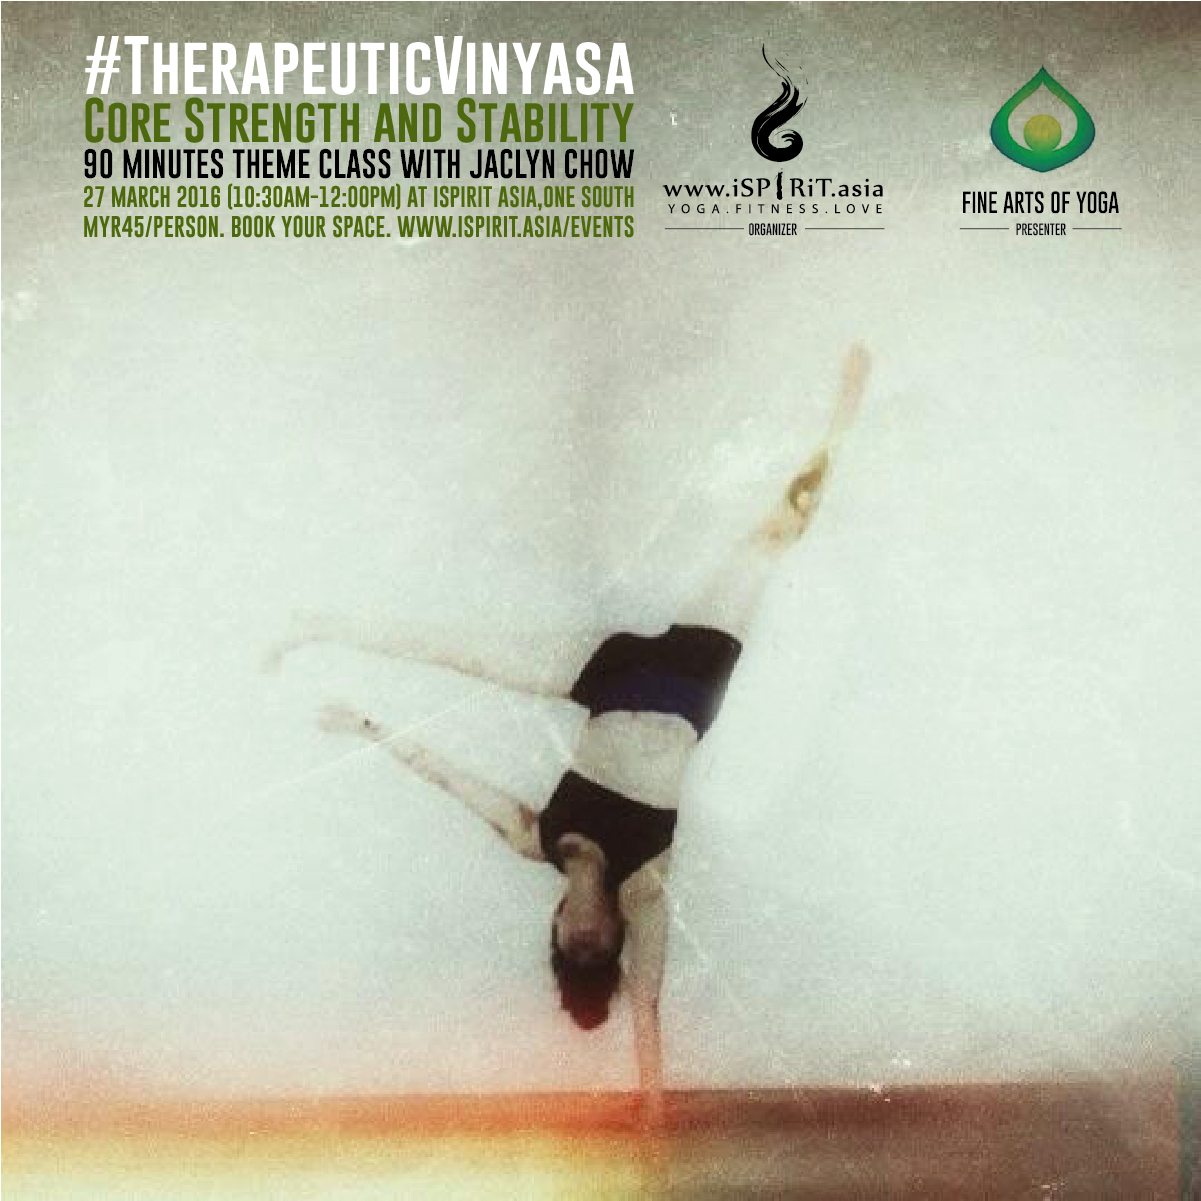 Therapeutic Vinyasa 'Core Strength and Stability' Poster v4